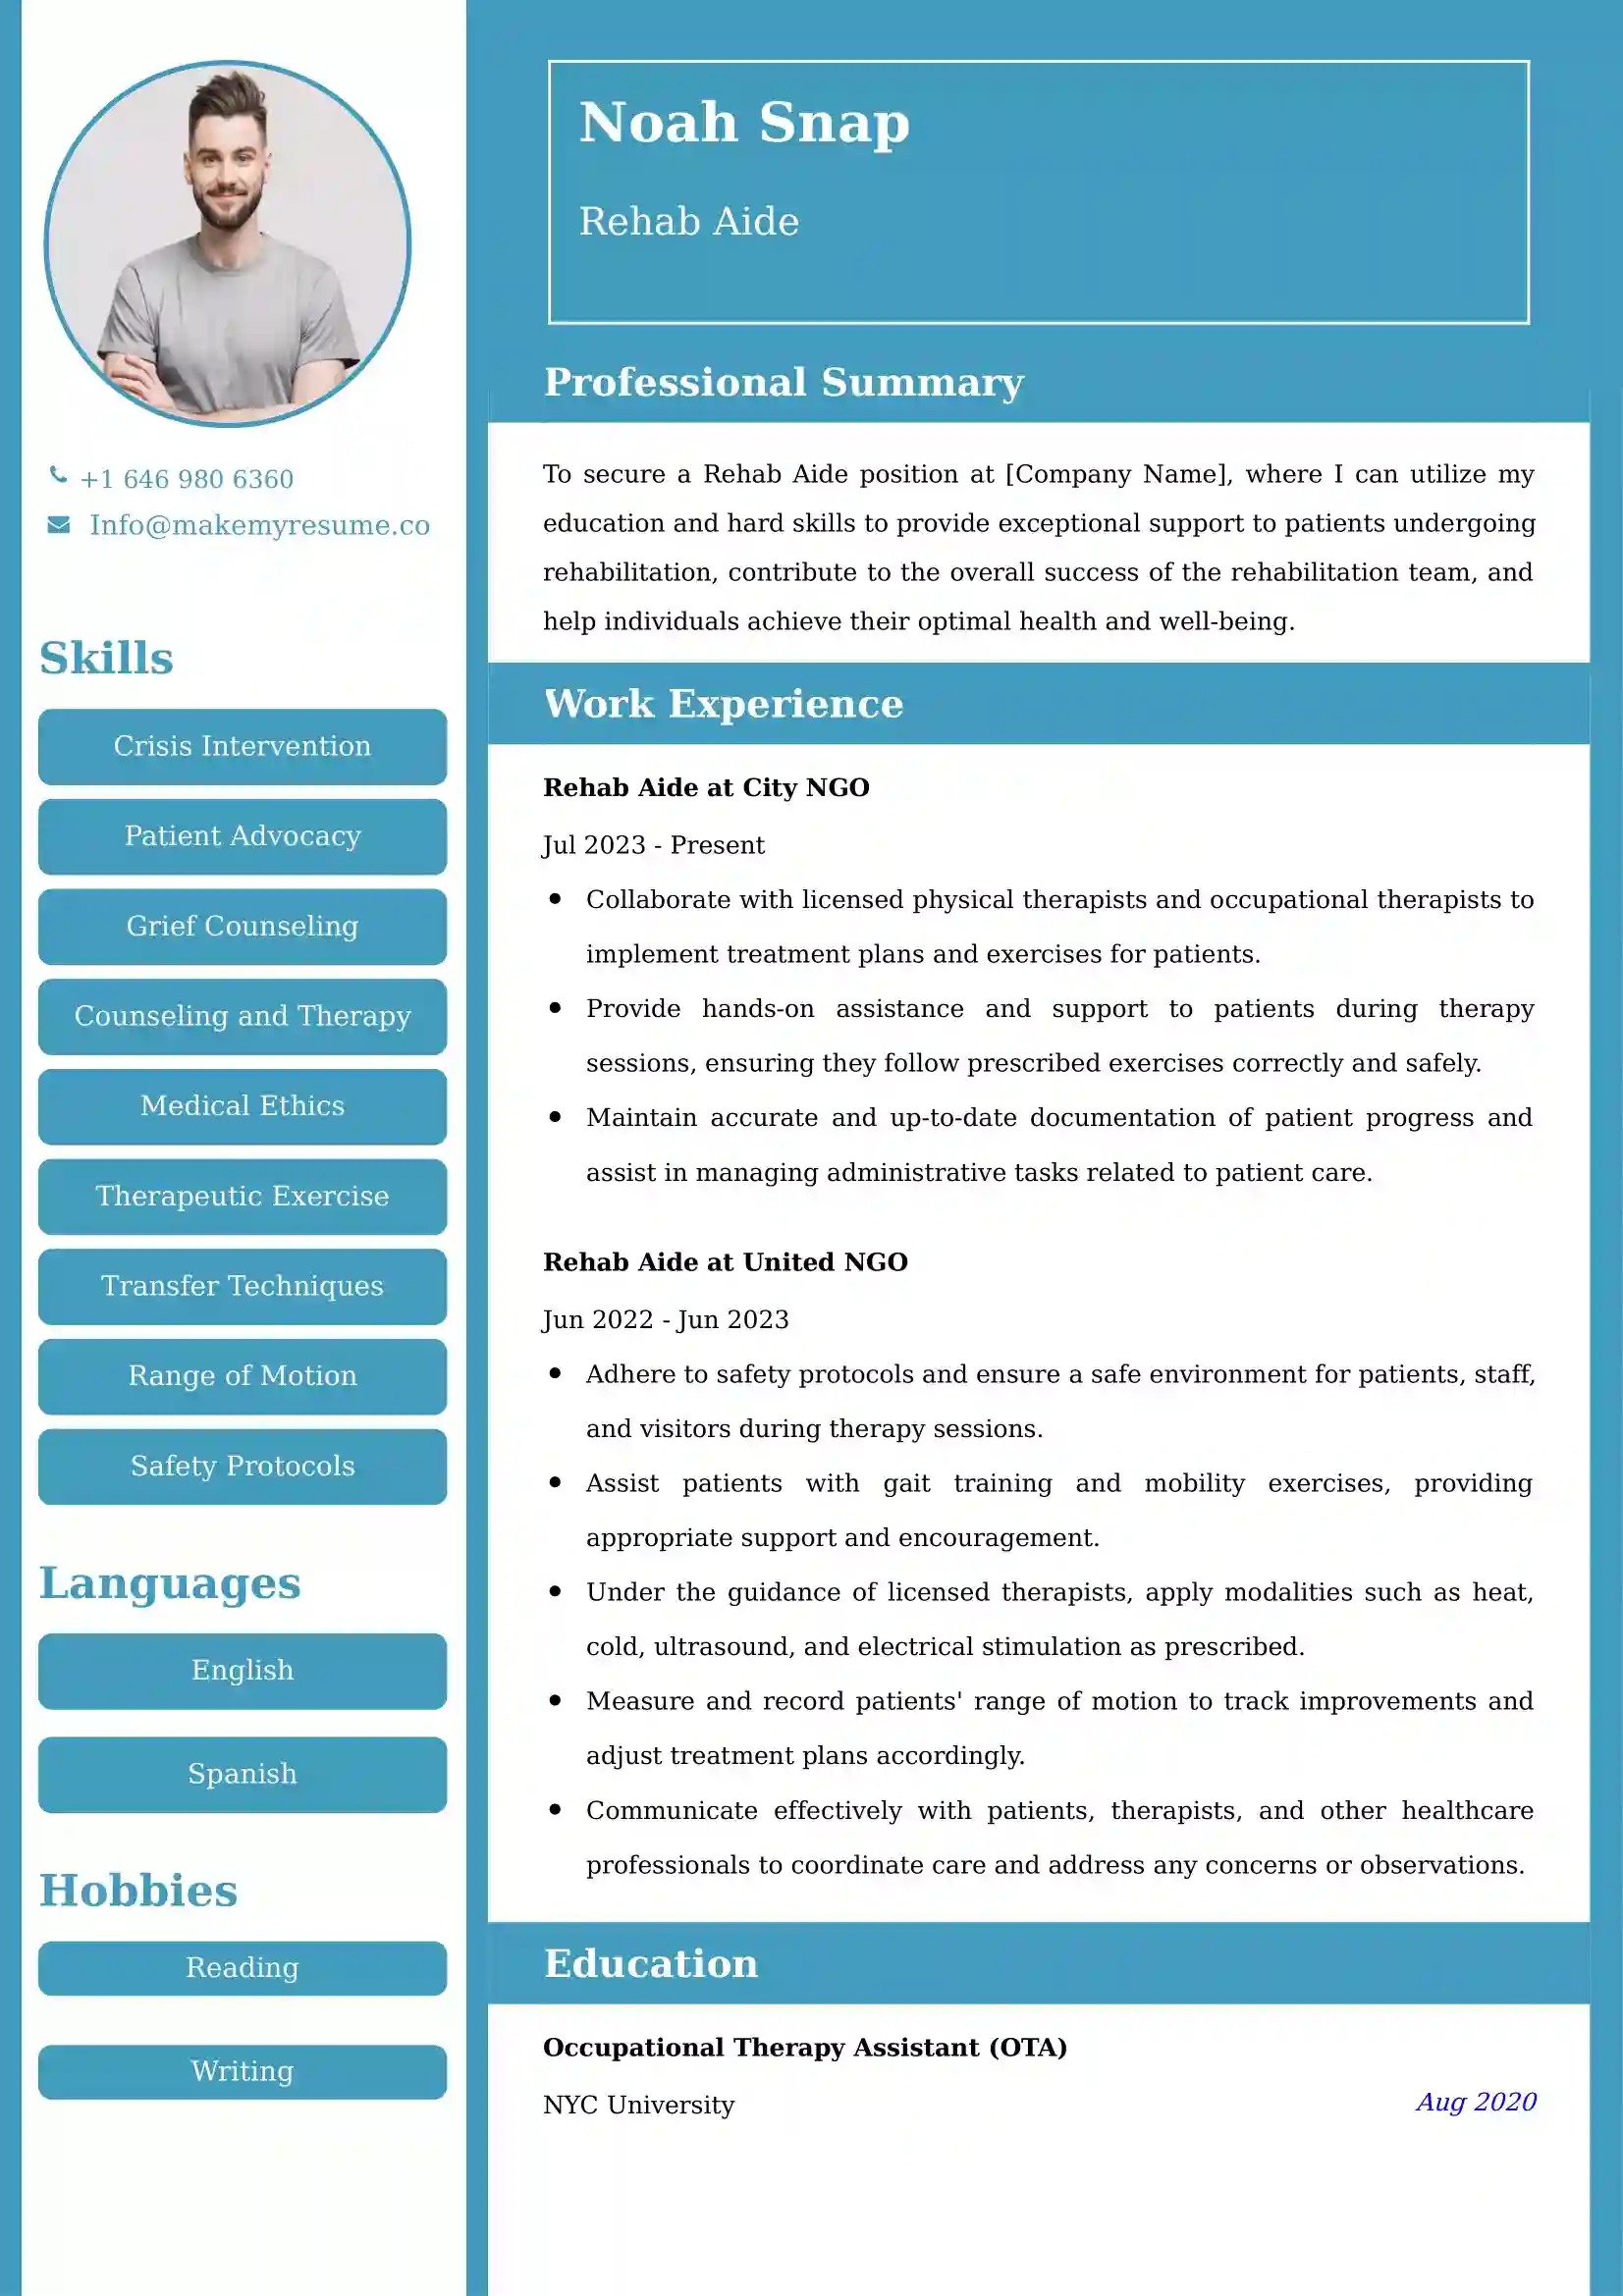 Rehab Aide Resume Examples - Brazilian Format, Latest Template